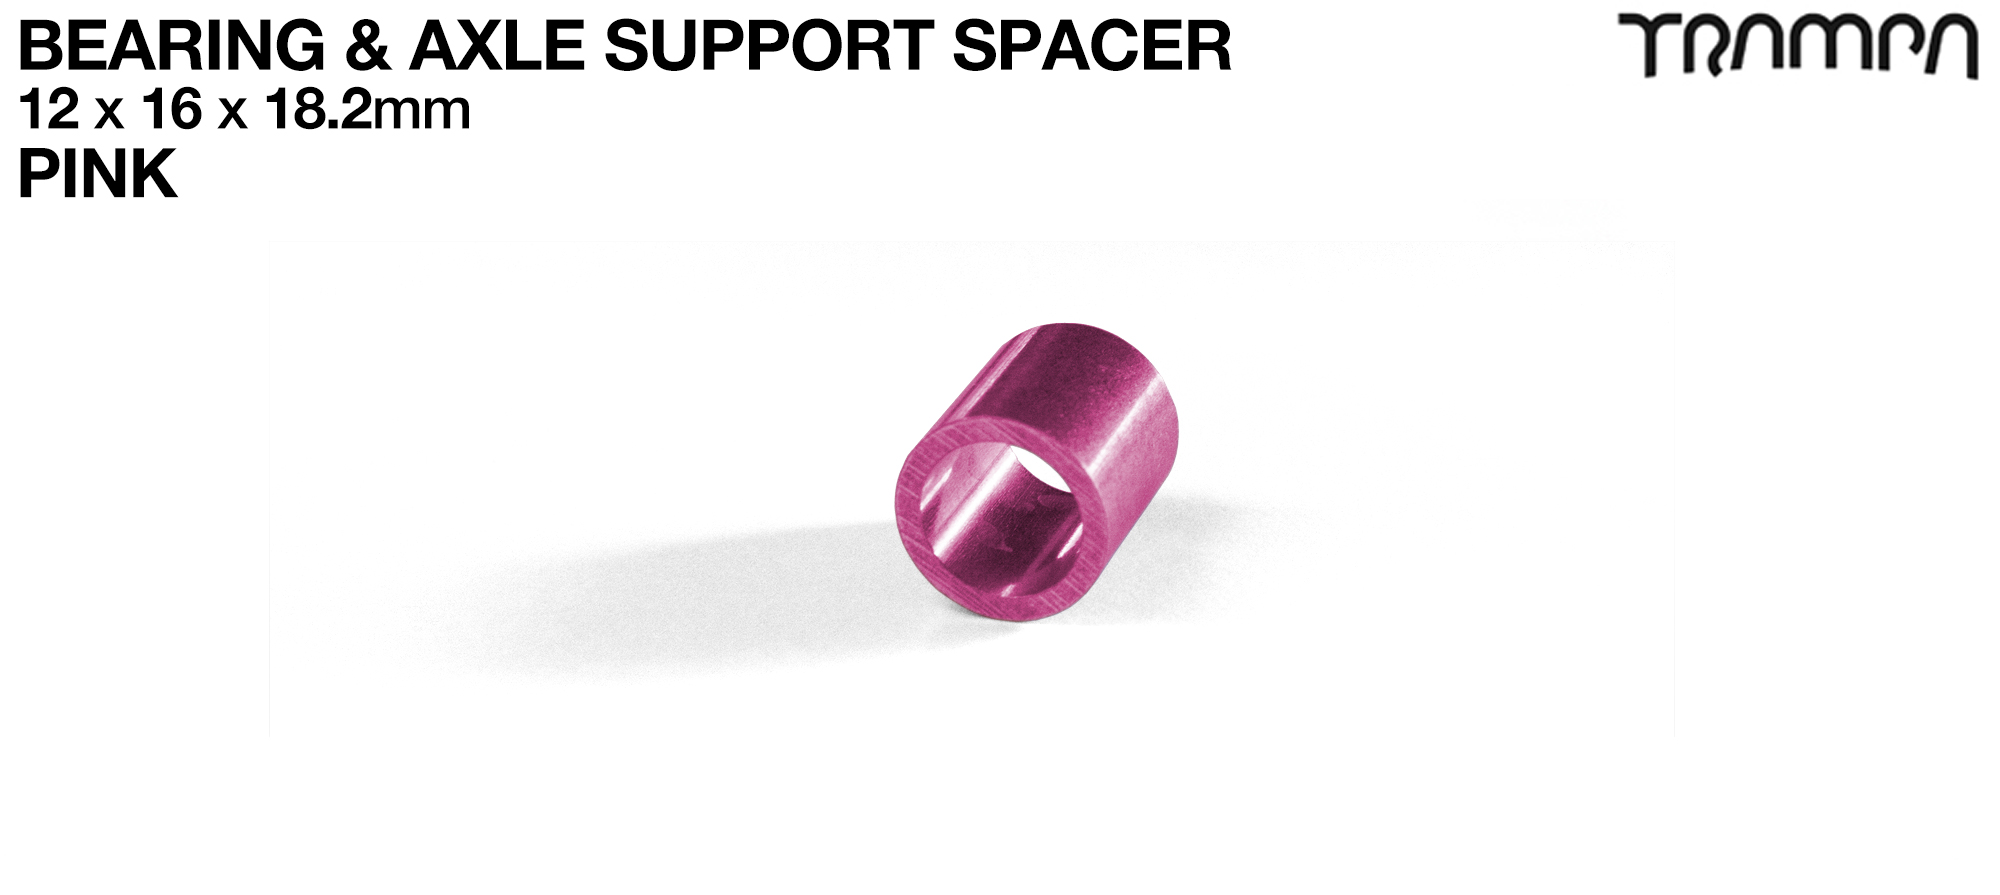 Wheel support spacer for all TRAMPA Wheels on 12mm ATB Axles - CNC precision 12mm x 16mm x 18.2mm  - PINK